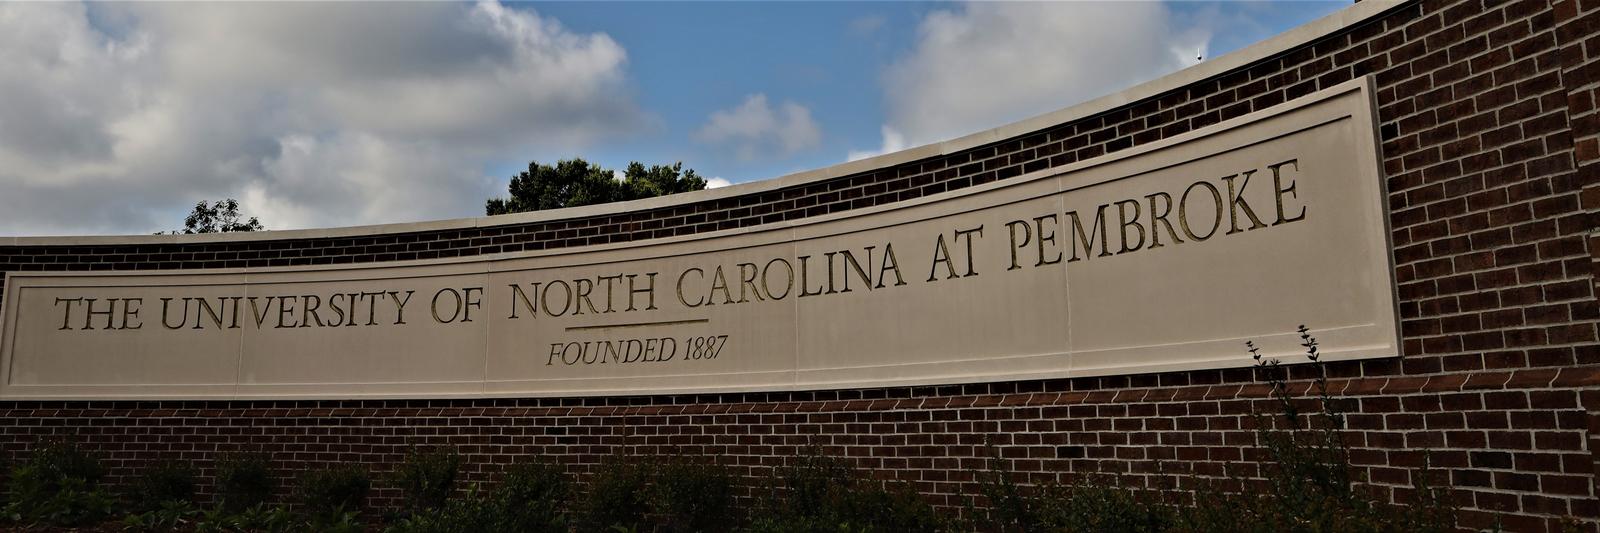 Office of Online Learning | The University of North Carolina at Pembroke